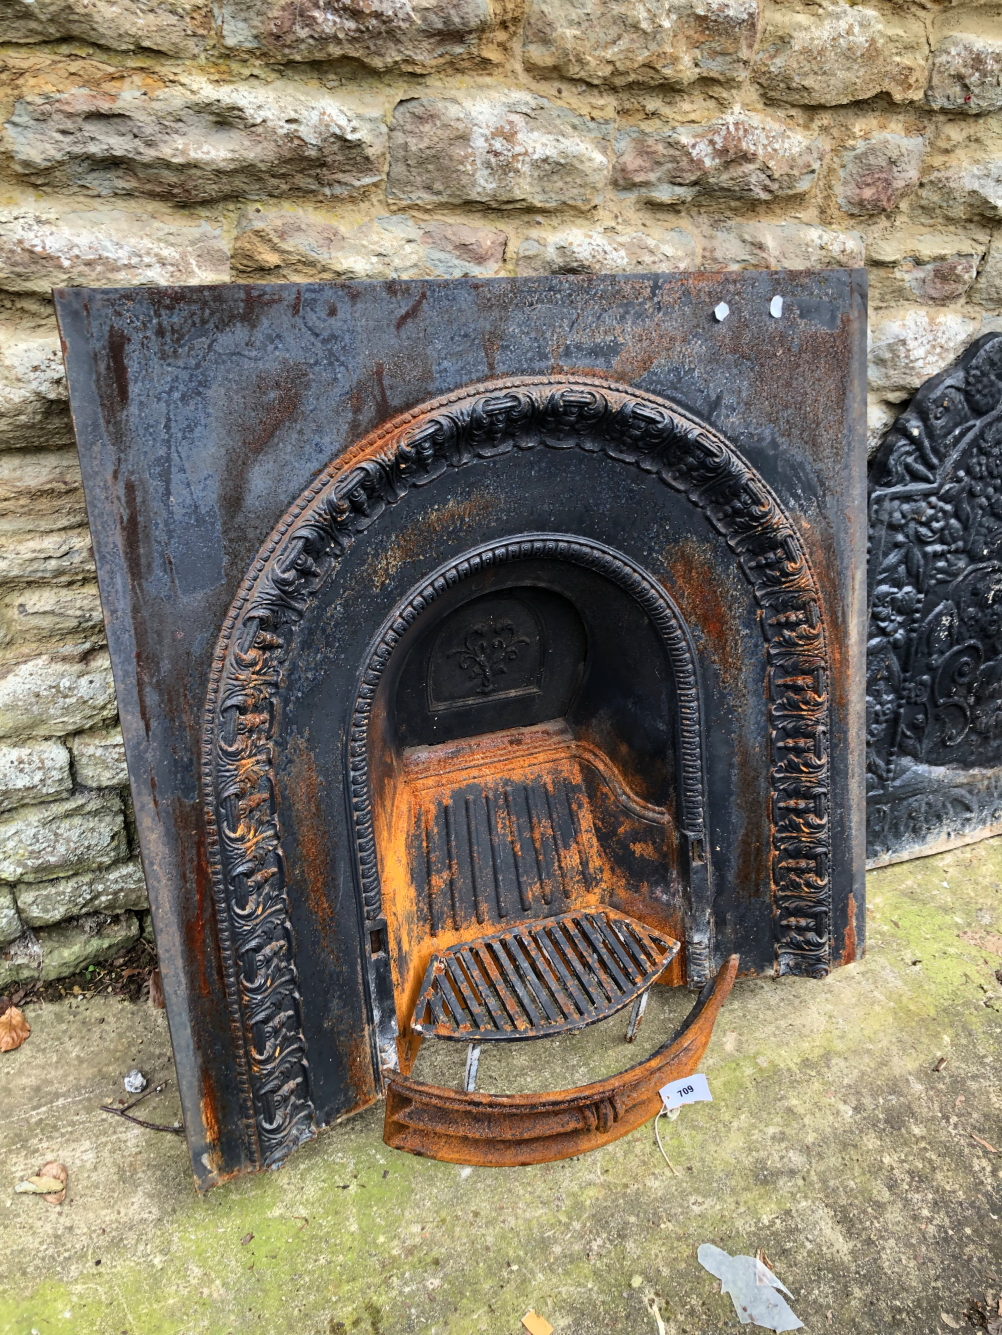 A CAST IRON FIRE SURROUND AND A GRATE.